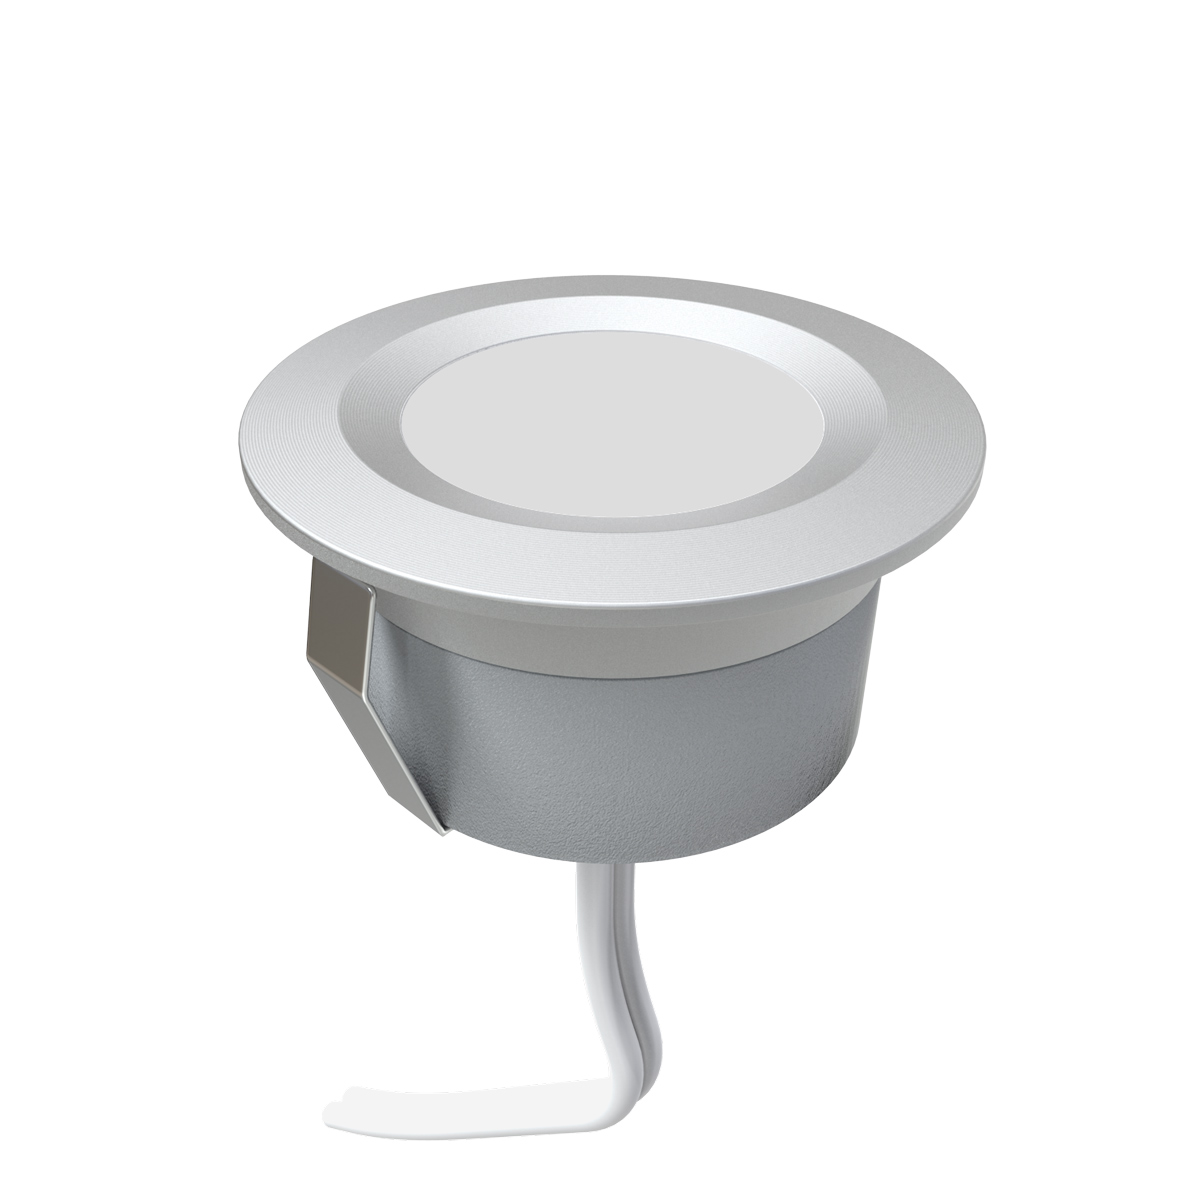 View Round 30mm LED Plinth Light Natural White information